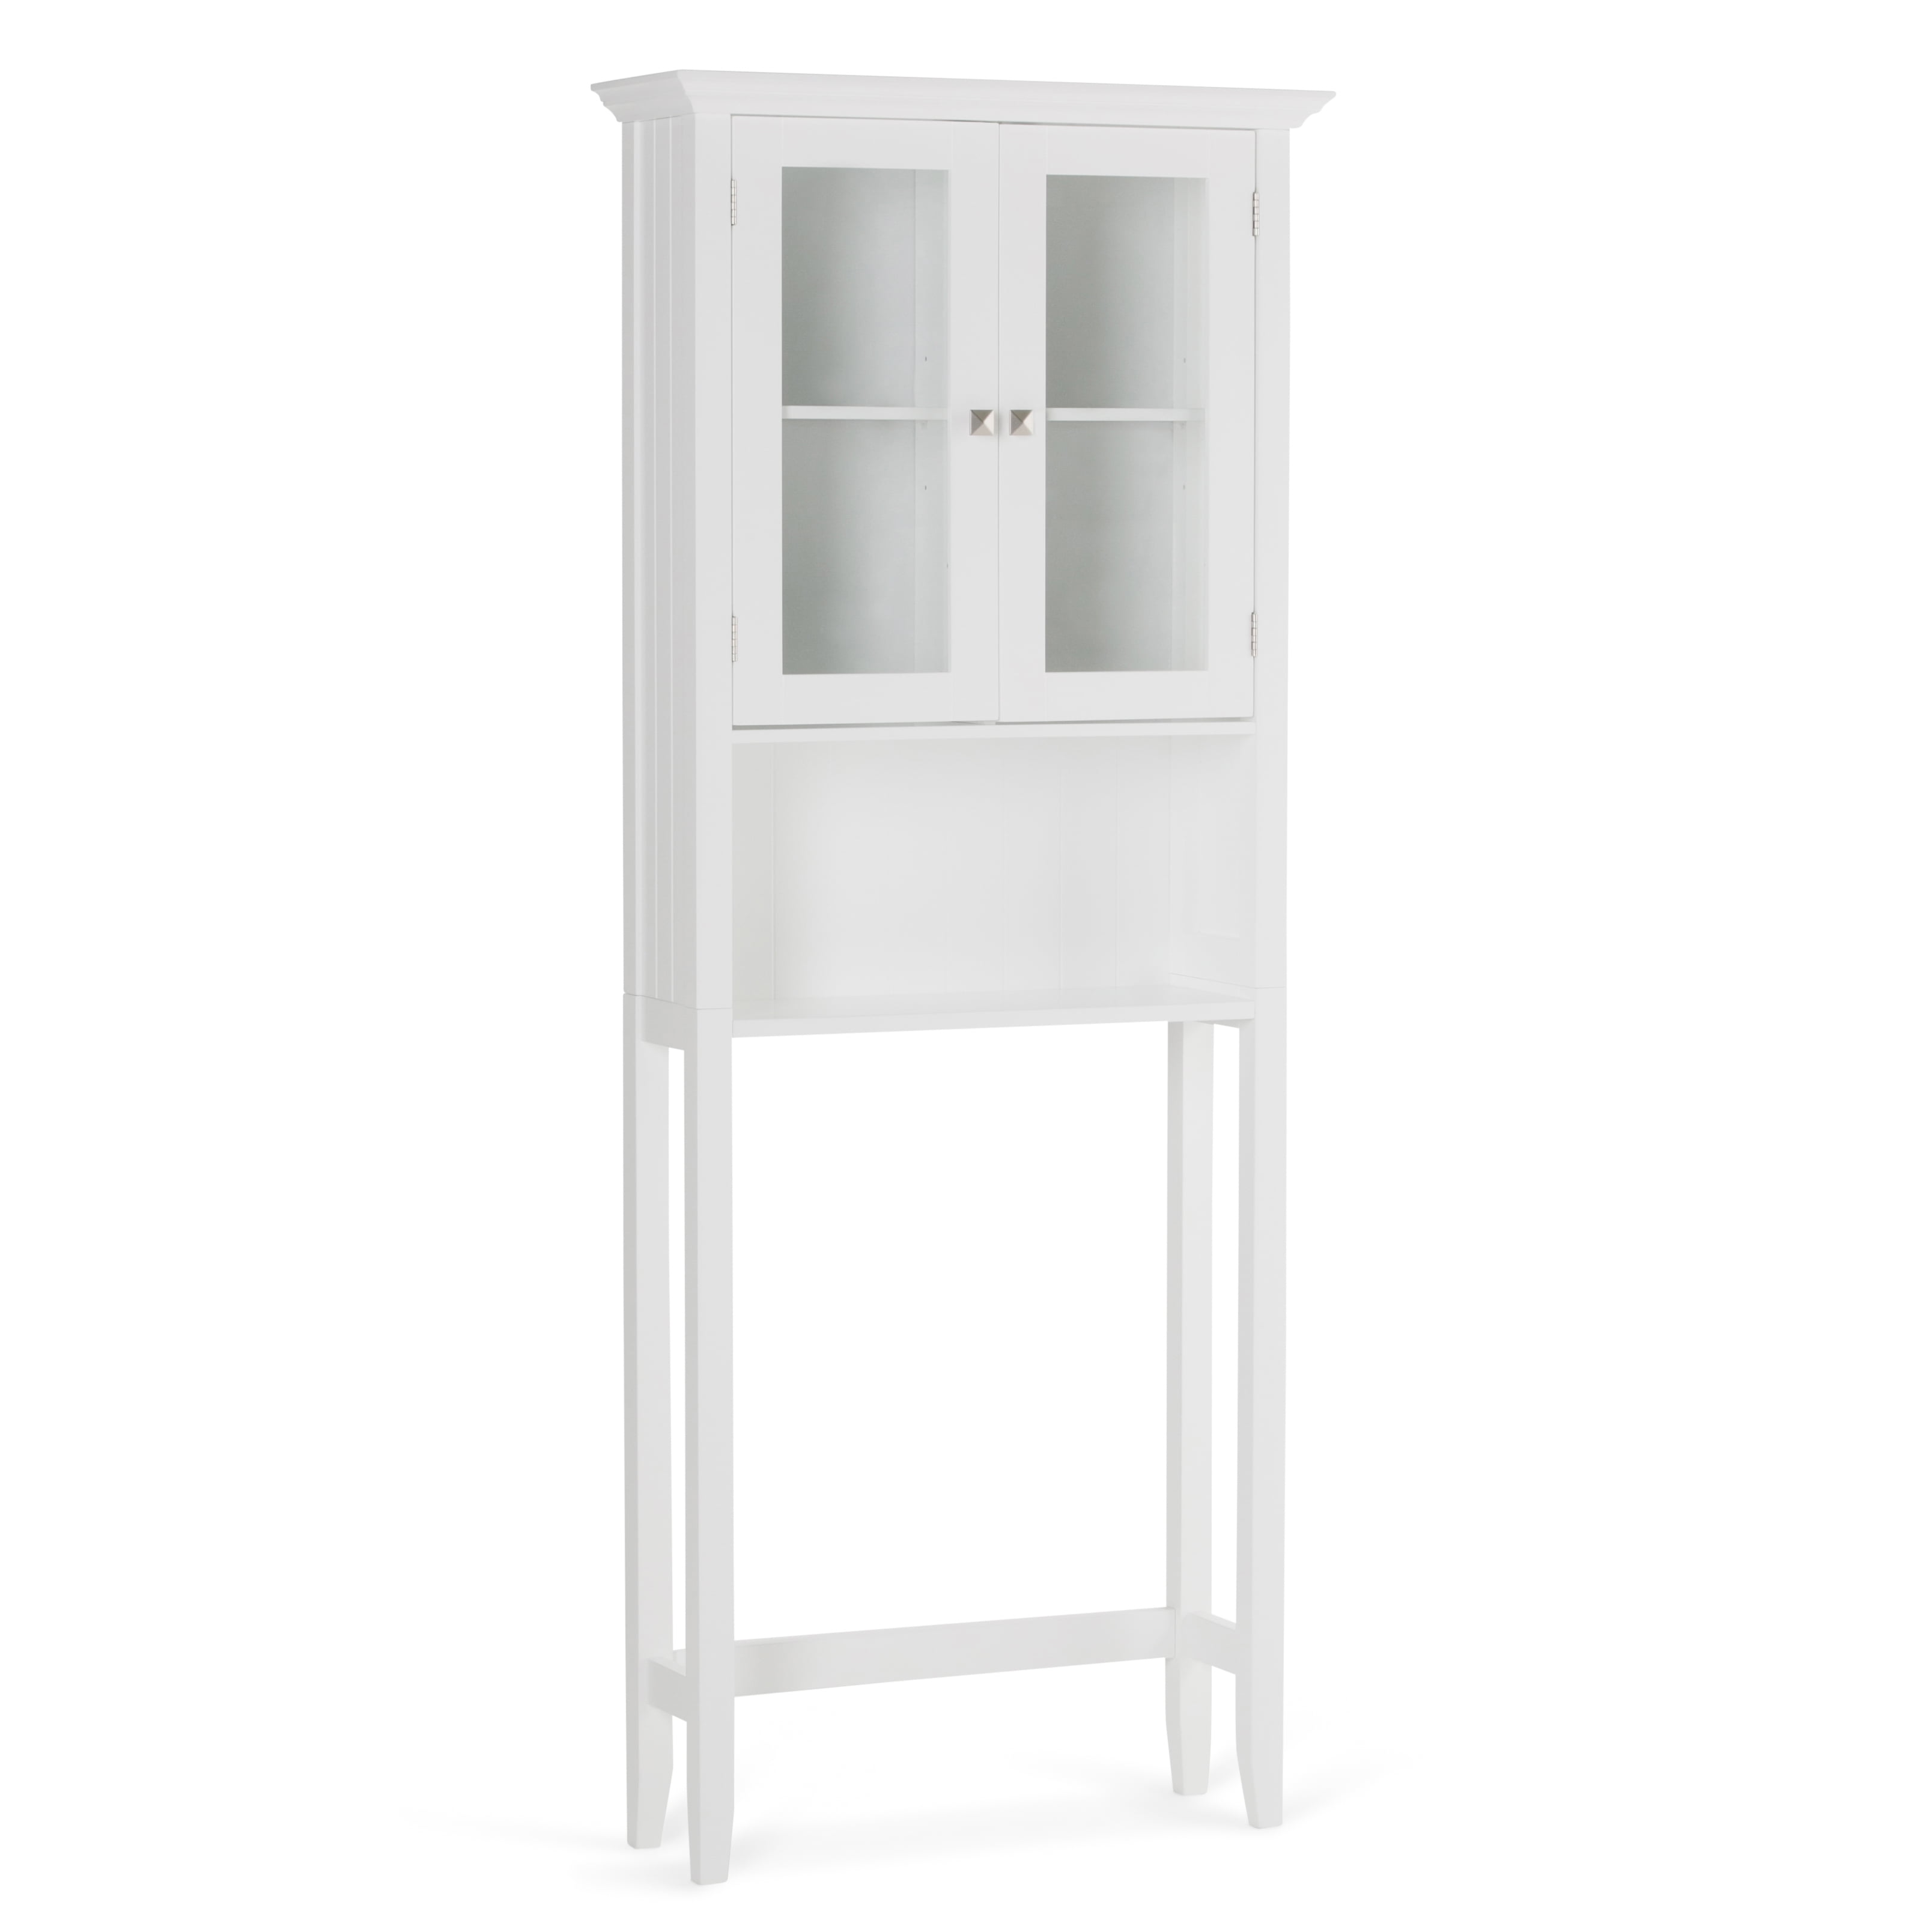 Simpli Home AXCBCACA-06 Acadian 68.4 inch H x 27.6 inch W Over The Toilet Space Saver Bath Cabinet in White 